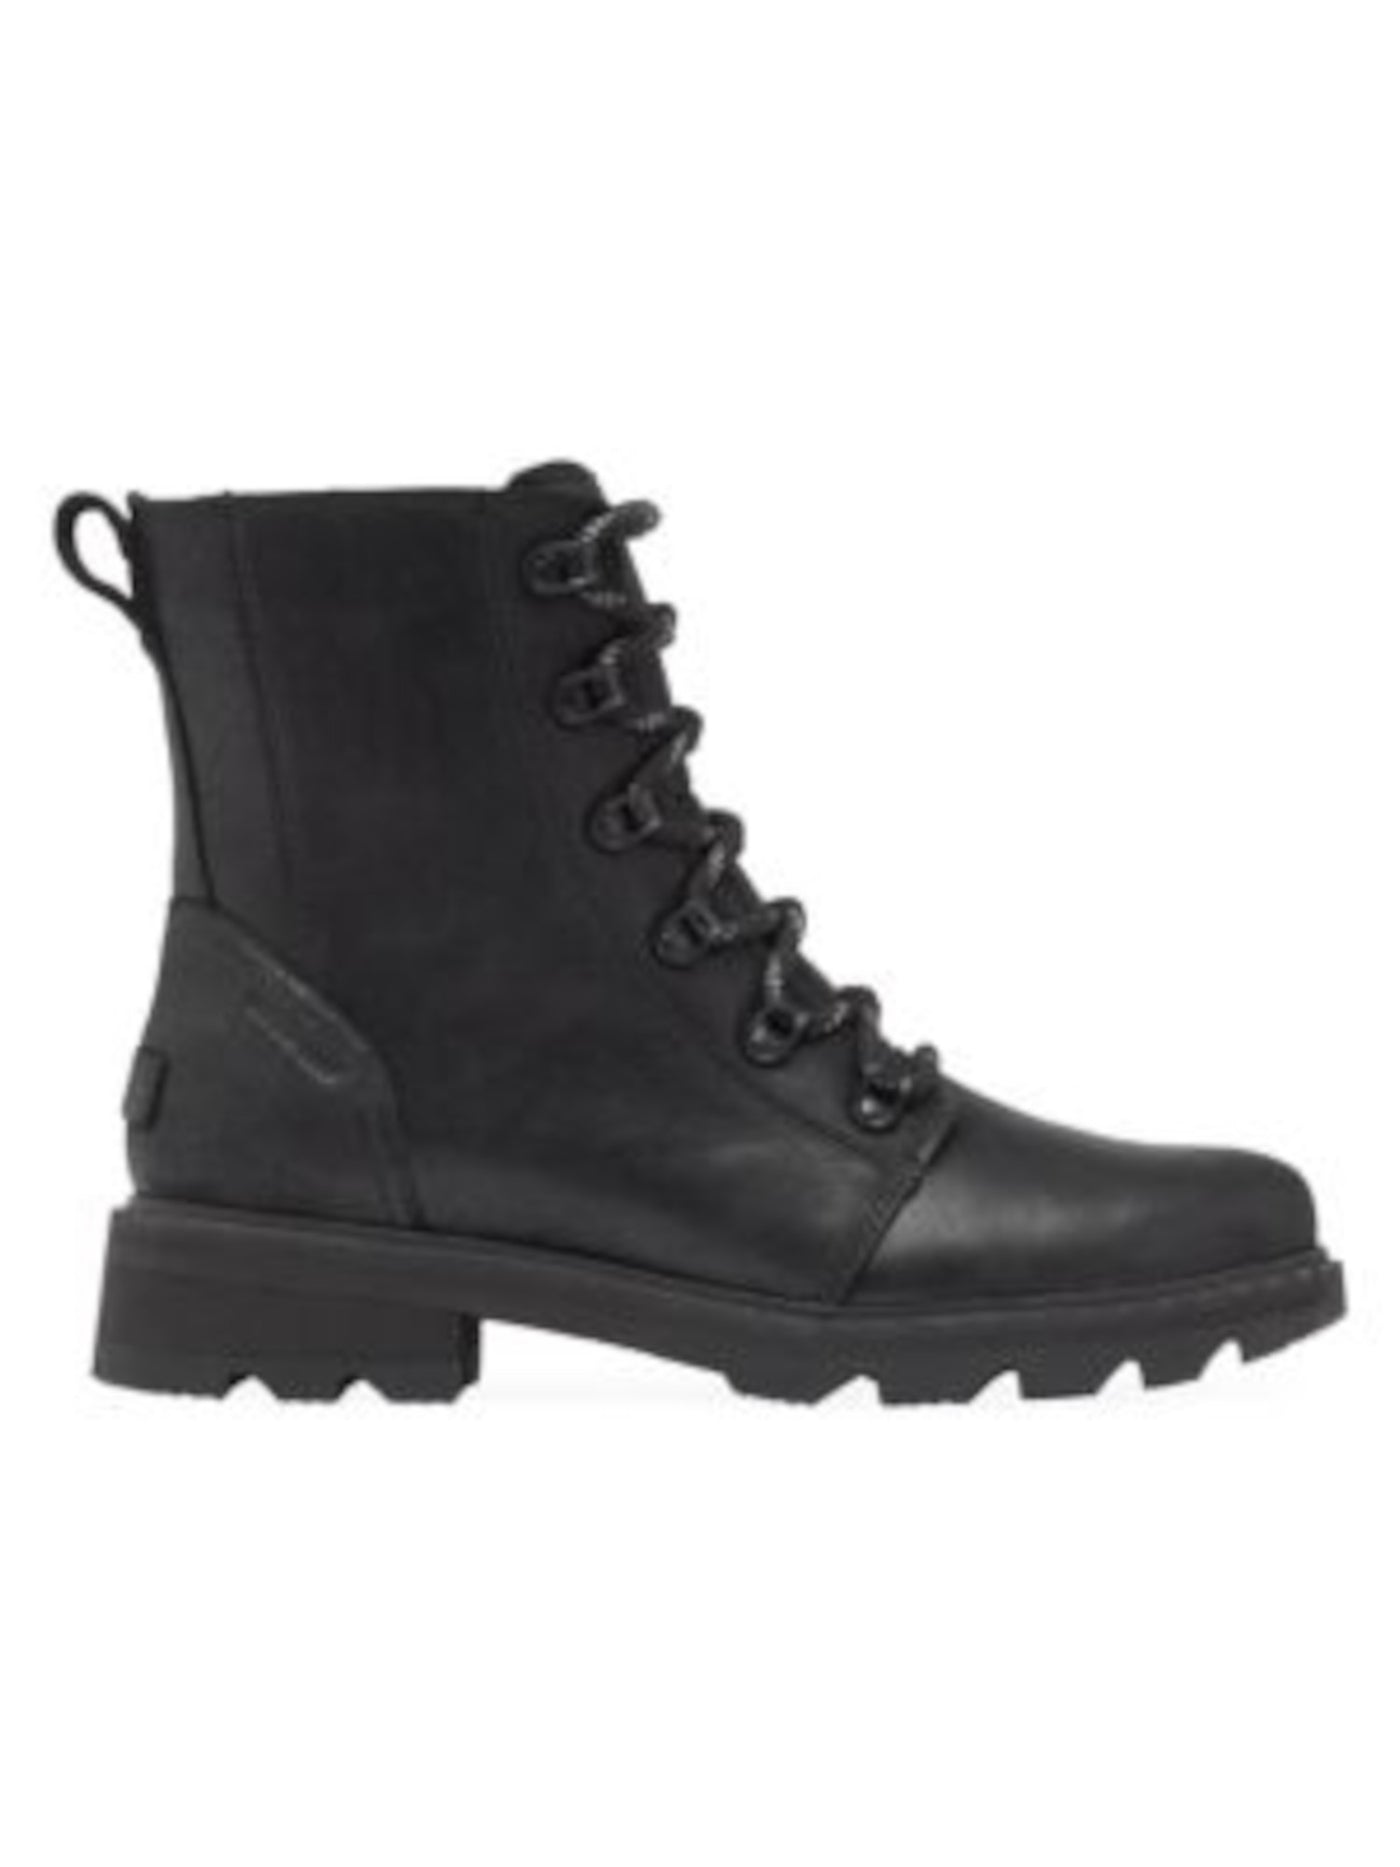 SOREL Womens Black Name At Heel Waterproof Padded Lennox Round Toe Lace-Up Leather Combat Boots 6.5